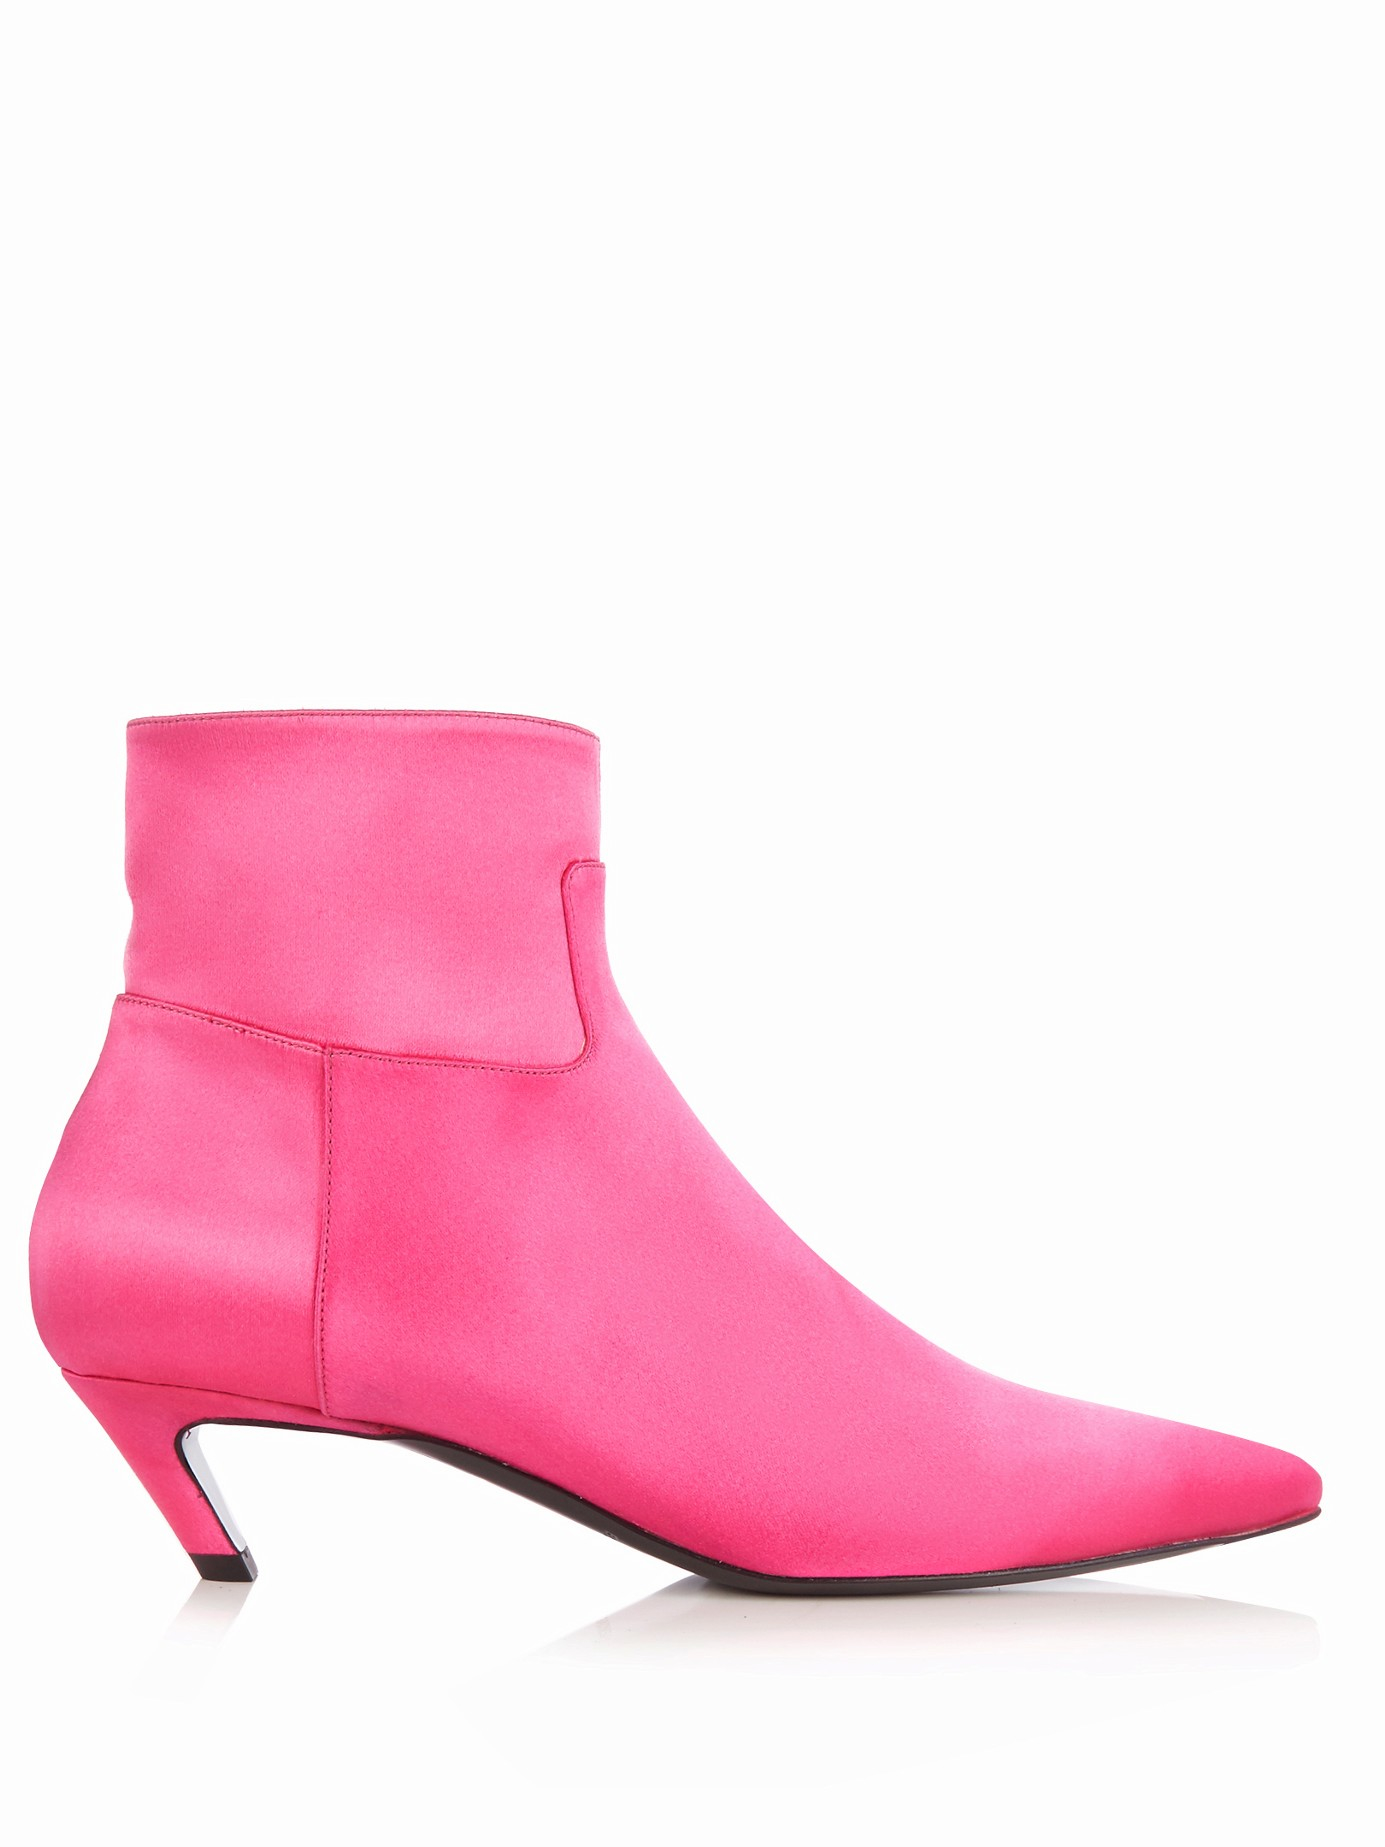 Lyst - Balenciaga Satin Ankle Boots in Pink